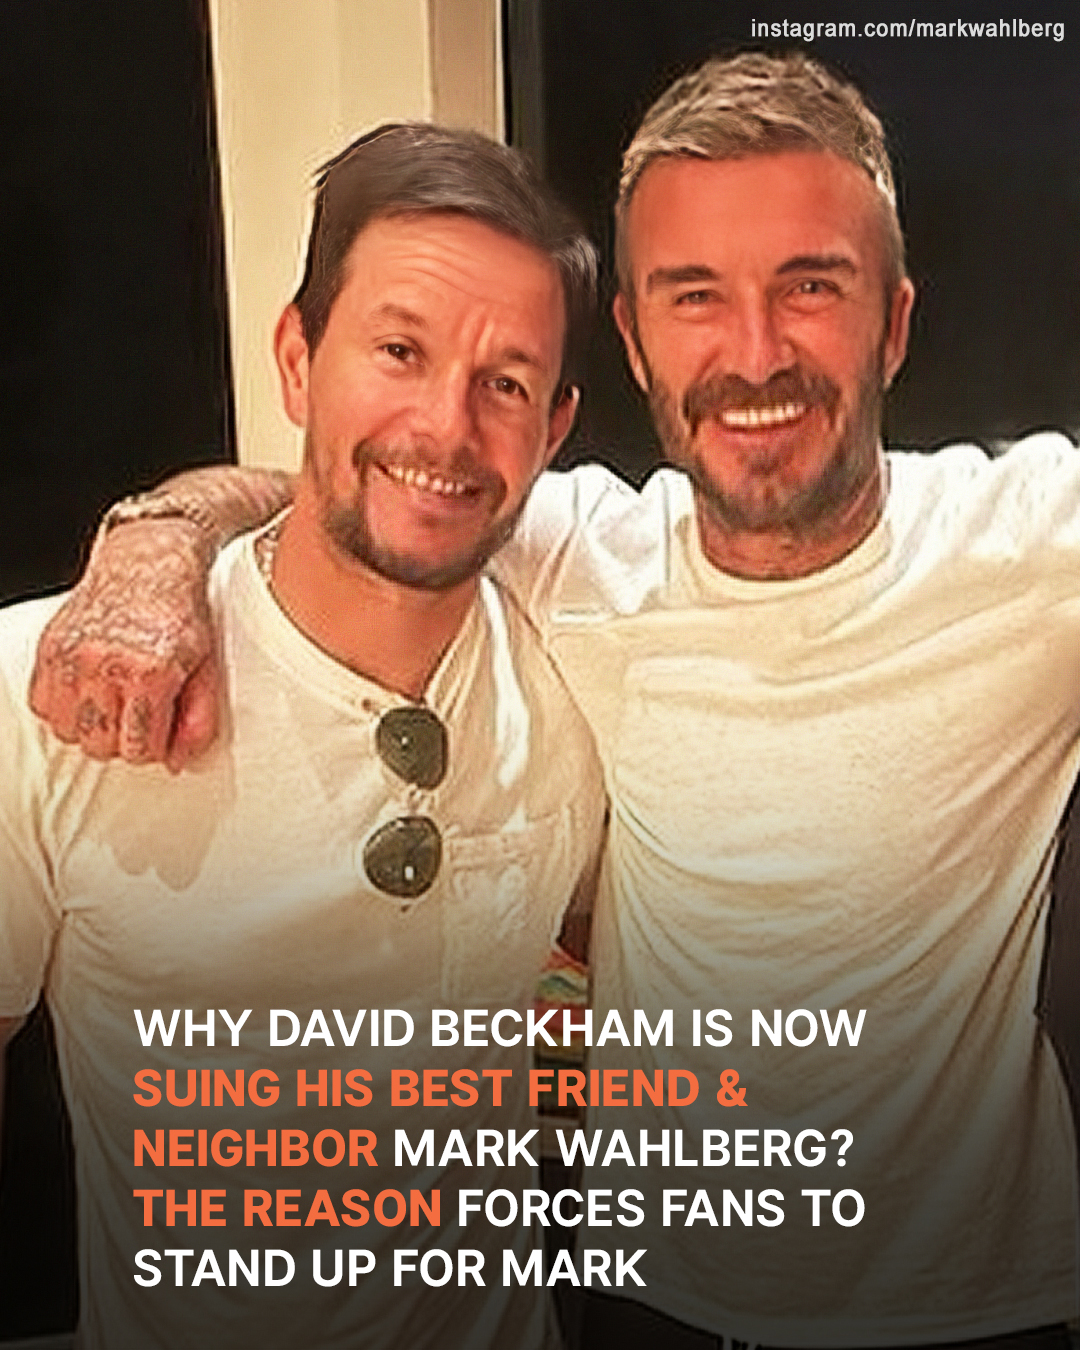 DAVID BECKHAM SUES HIS FRIEND MARK WAHLBERG: WHAT HAPPENED & WHY DO FANS STRONGLY SUPPORT ONE OF THEM?